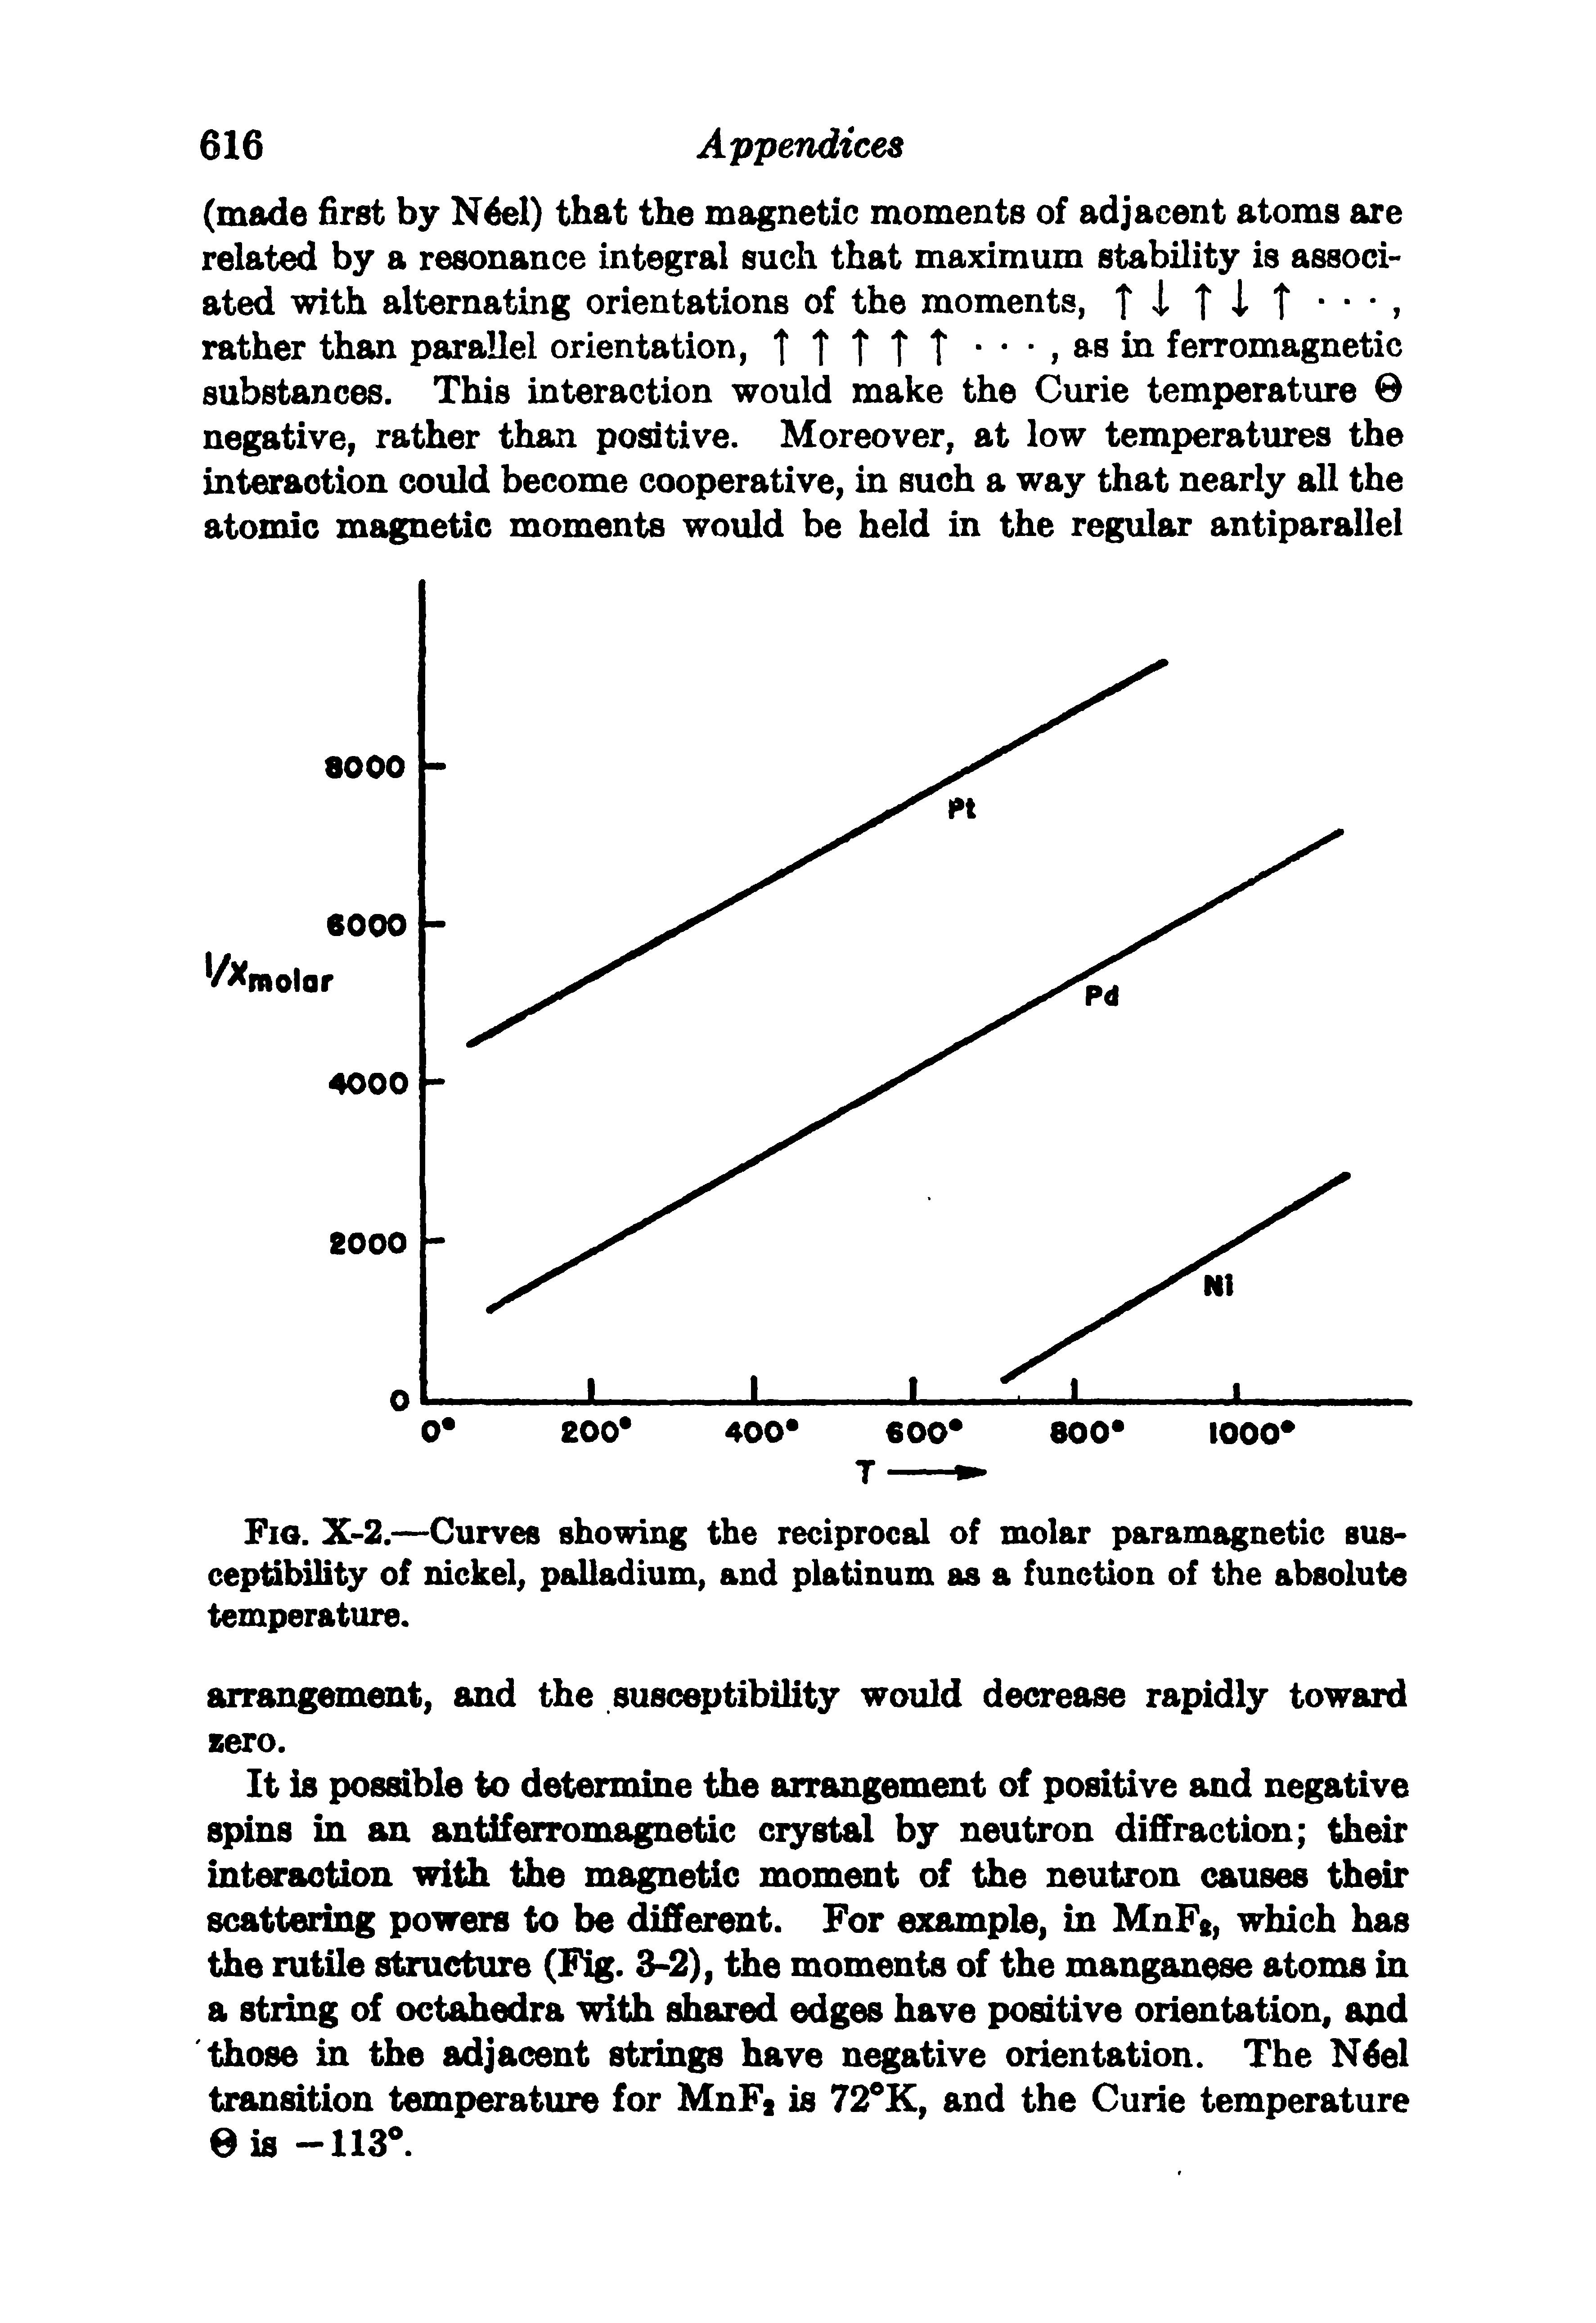 Fig. X-2.—Curves showing the reciprocal of molar paramagnetic susceptibility of nickel, palladium, and platinum as a function of the absolute temperature.